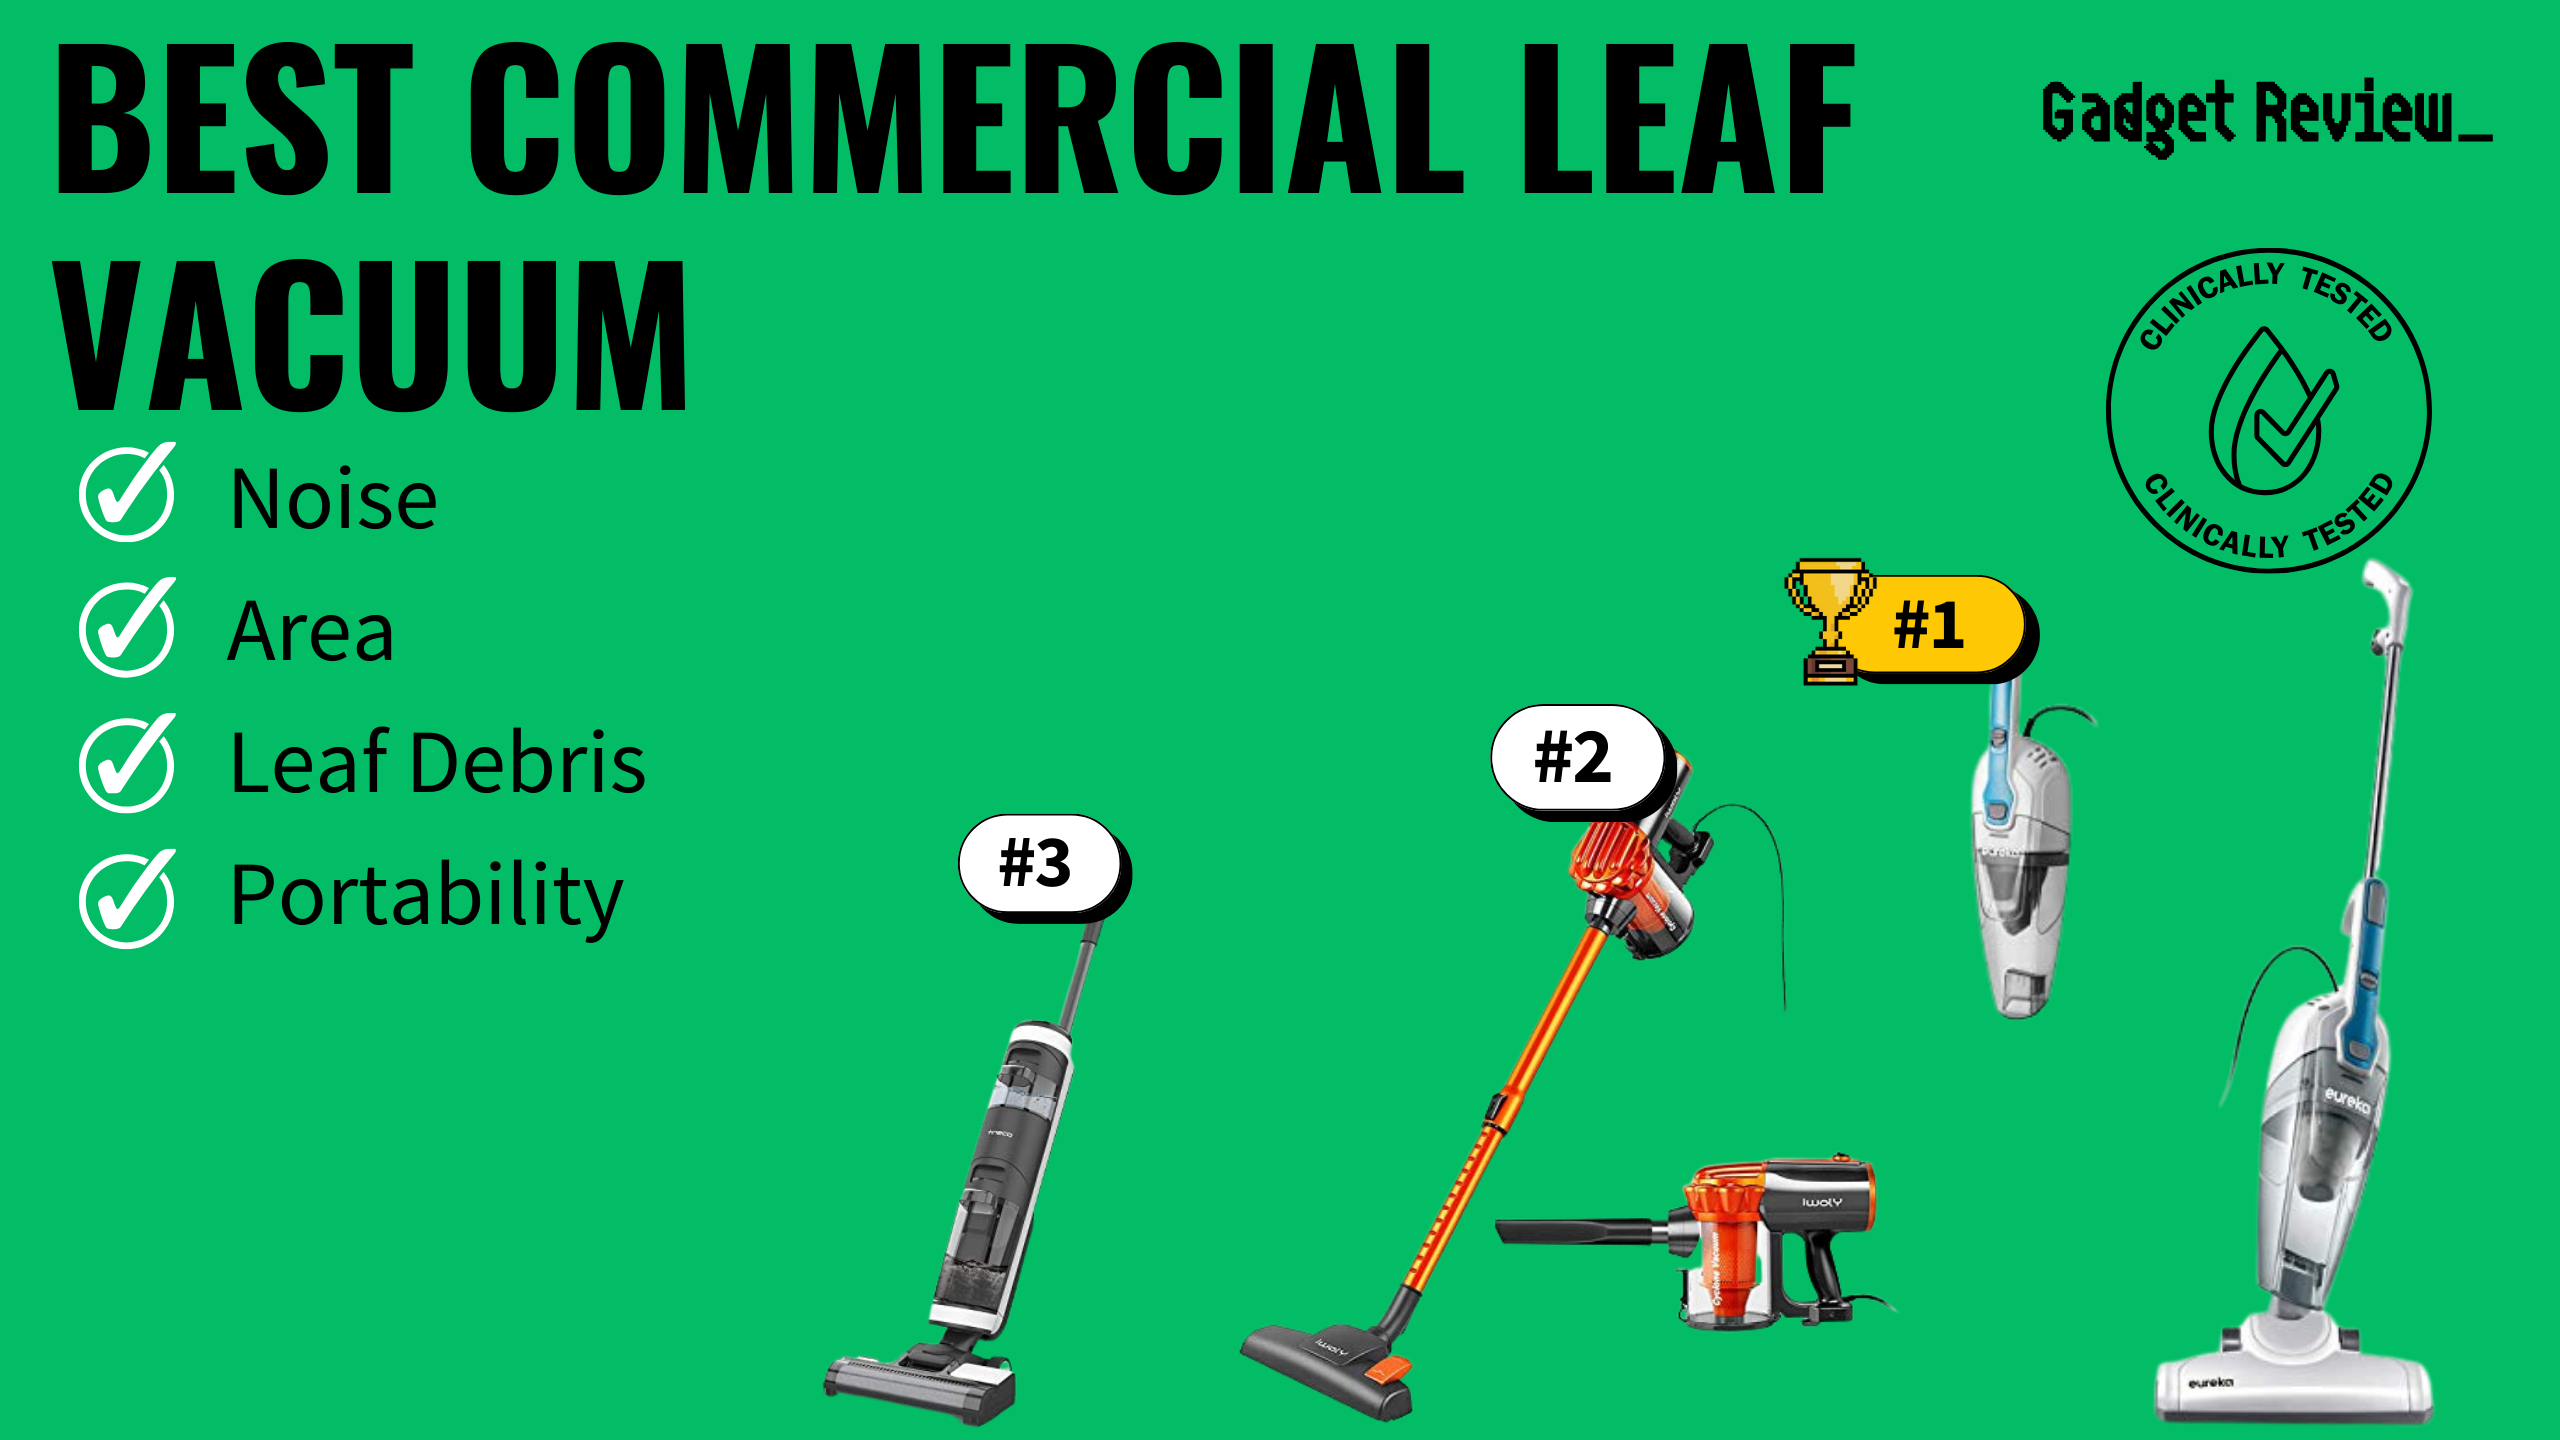 Best Commercial Leaf Vacuums